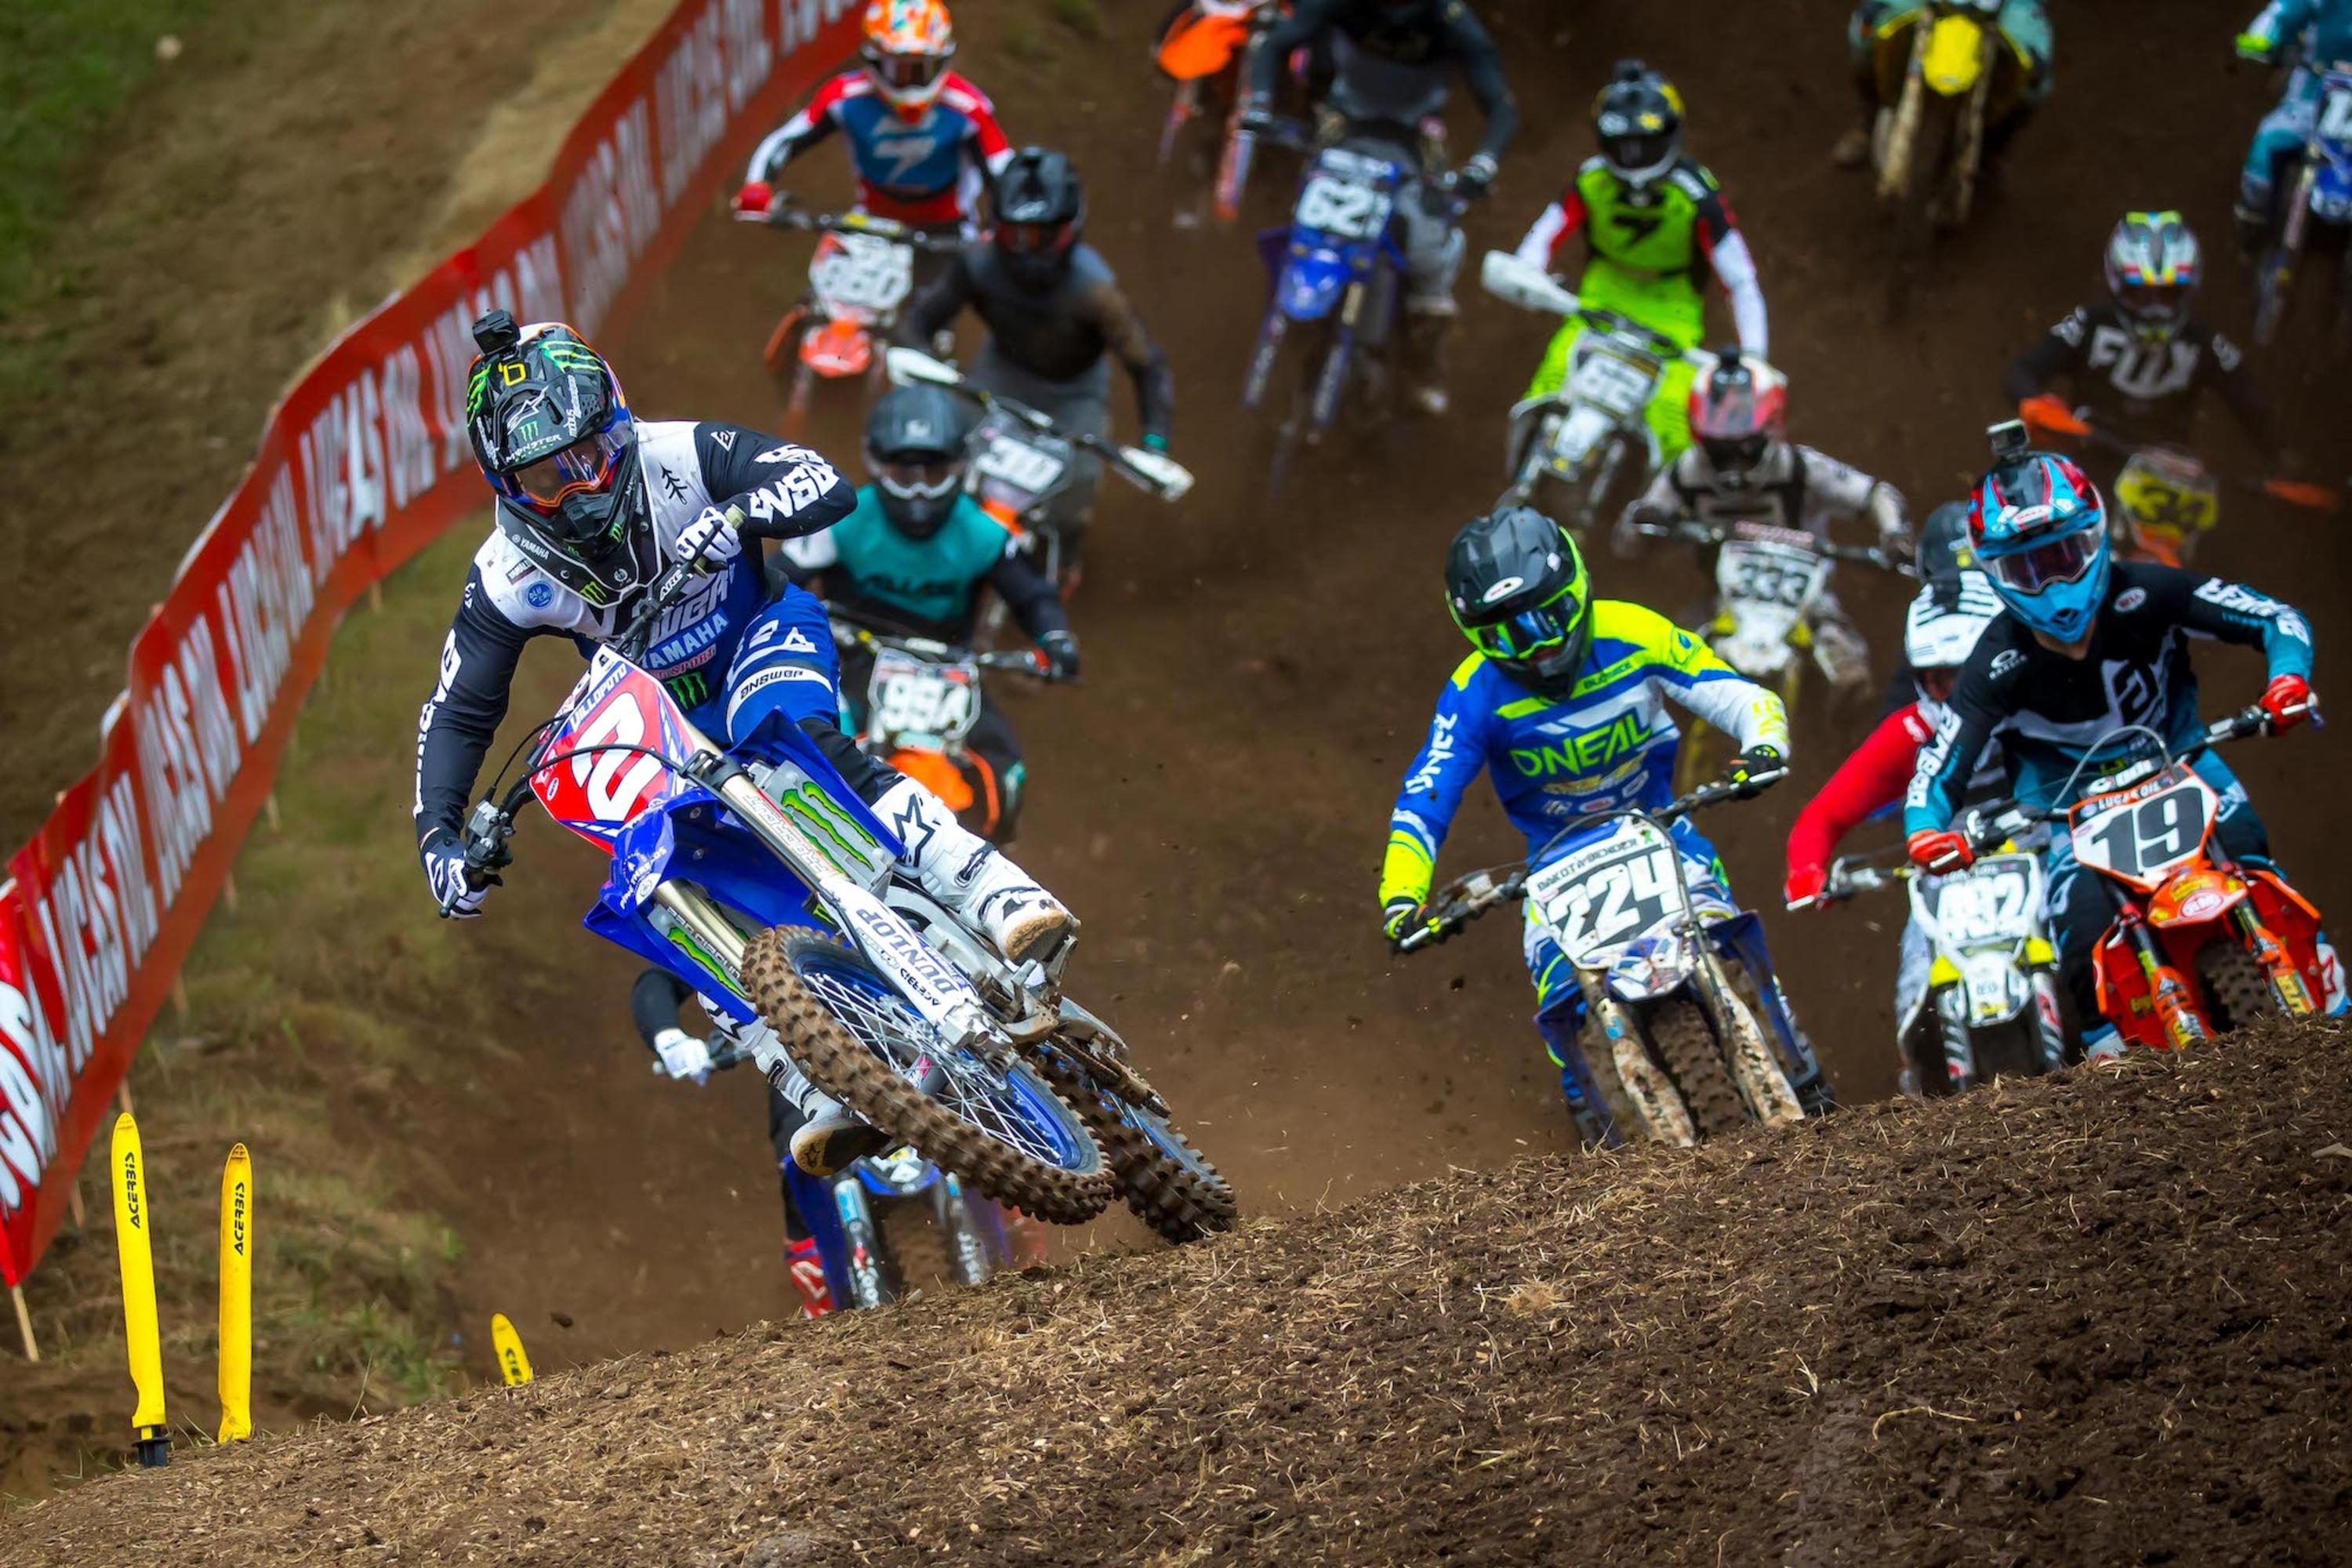 Lucas Oil Pro Motocross Championship Will Not Include 125 All-Star Series for 2020 Season